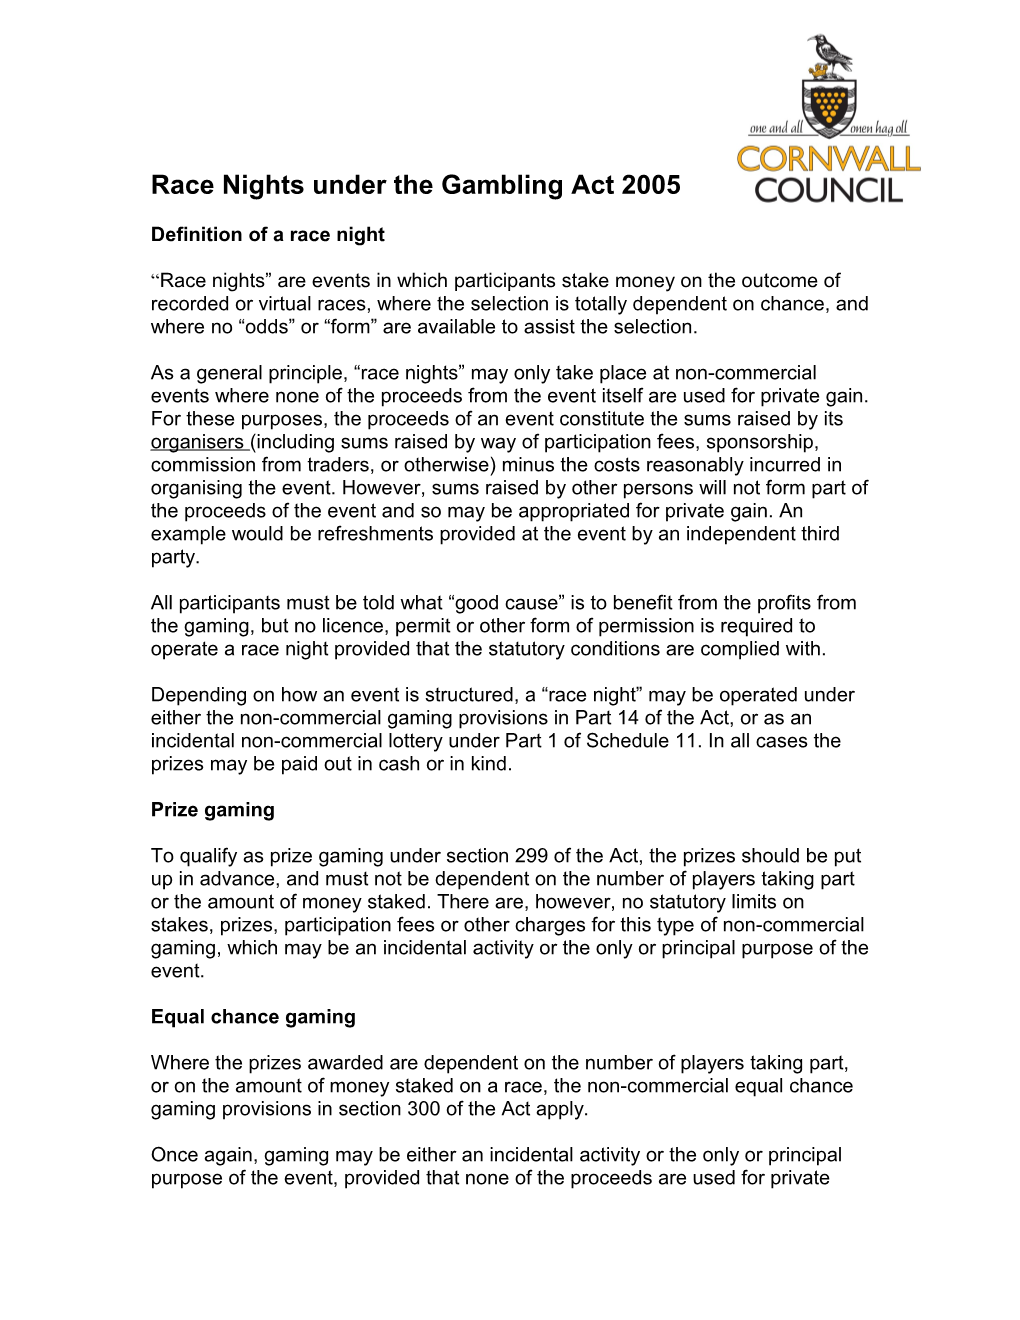 Race Nights Under the Gambling Act 2005